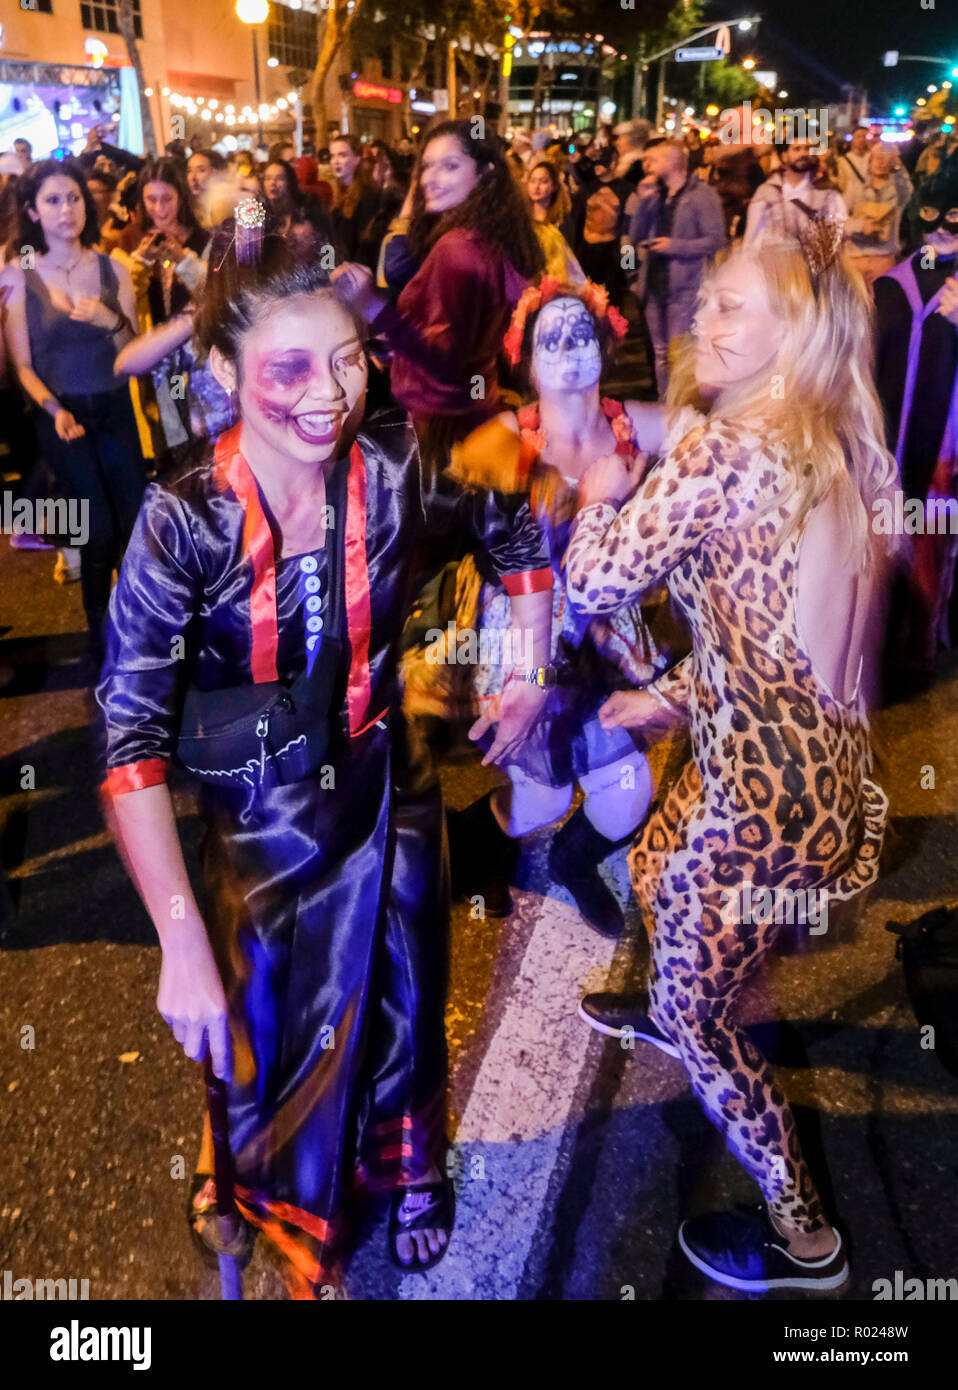 Los Angeles, USA. 27th Oct 2018. A general view of costumes at Incubus  concert on October 27, 2018 at KROQ Halloween Costume Ball at The Fonda  Theatre in Los Angeles, California. Photo